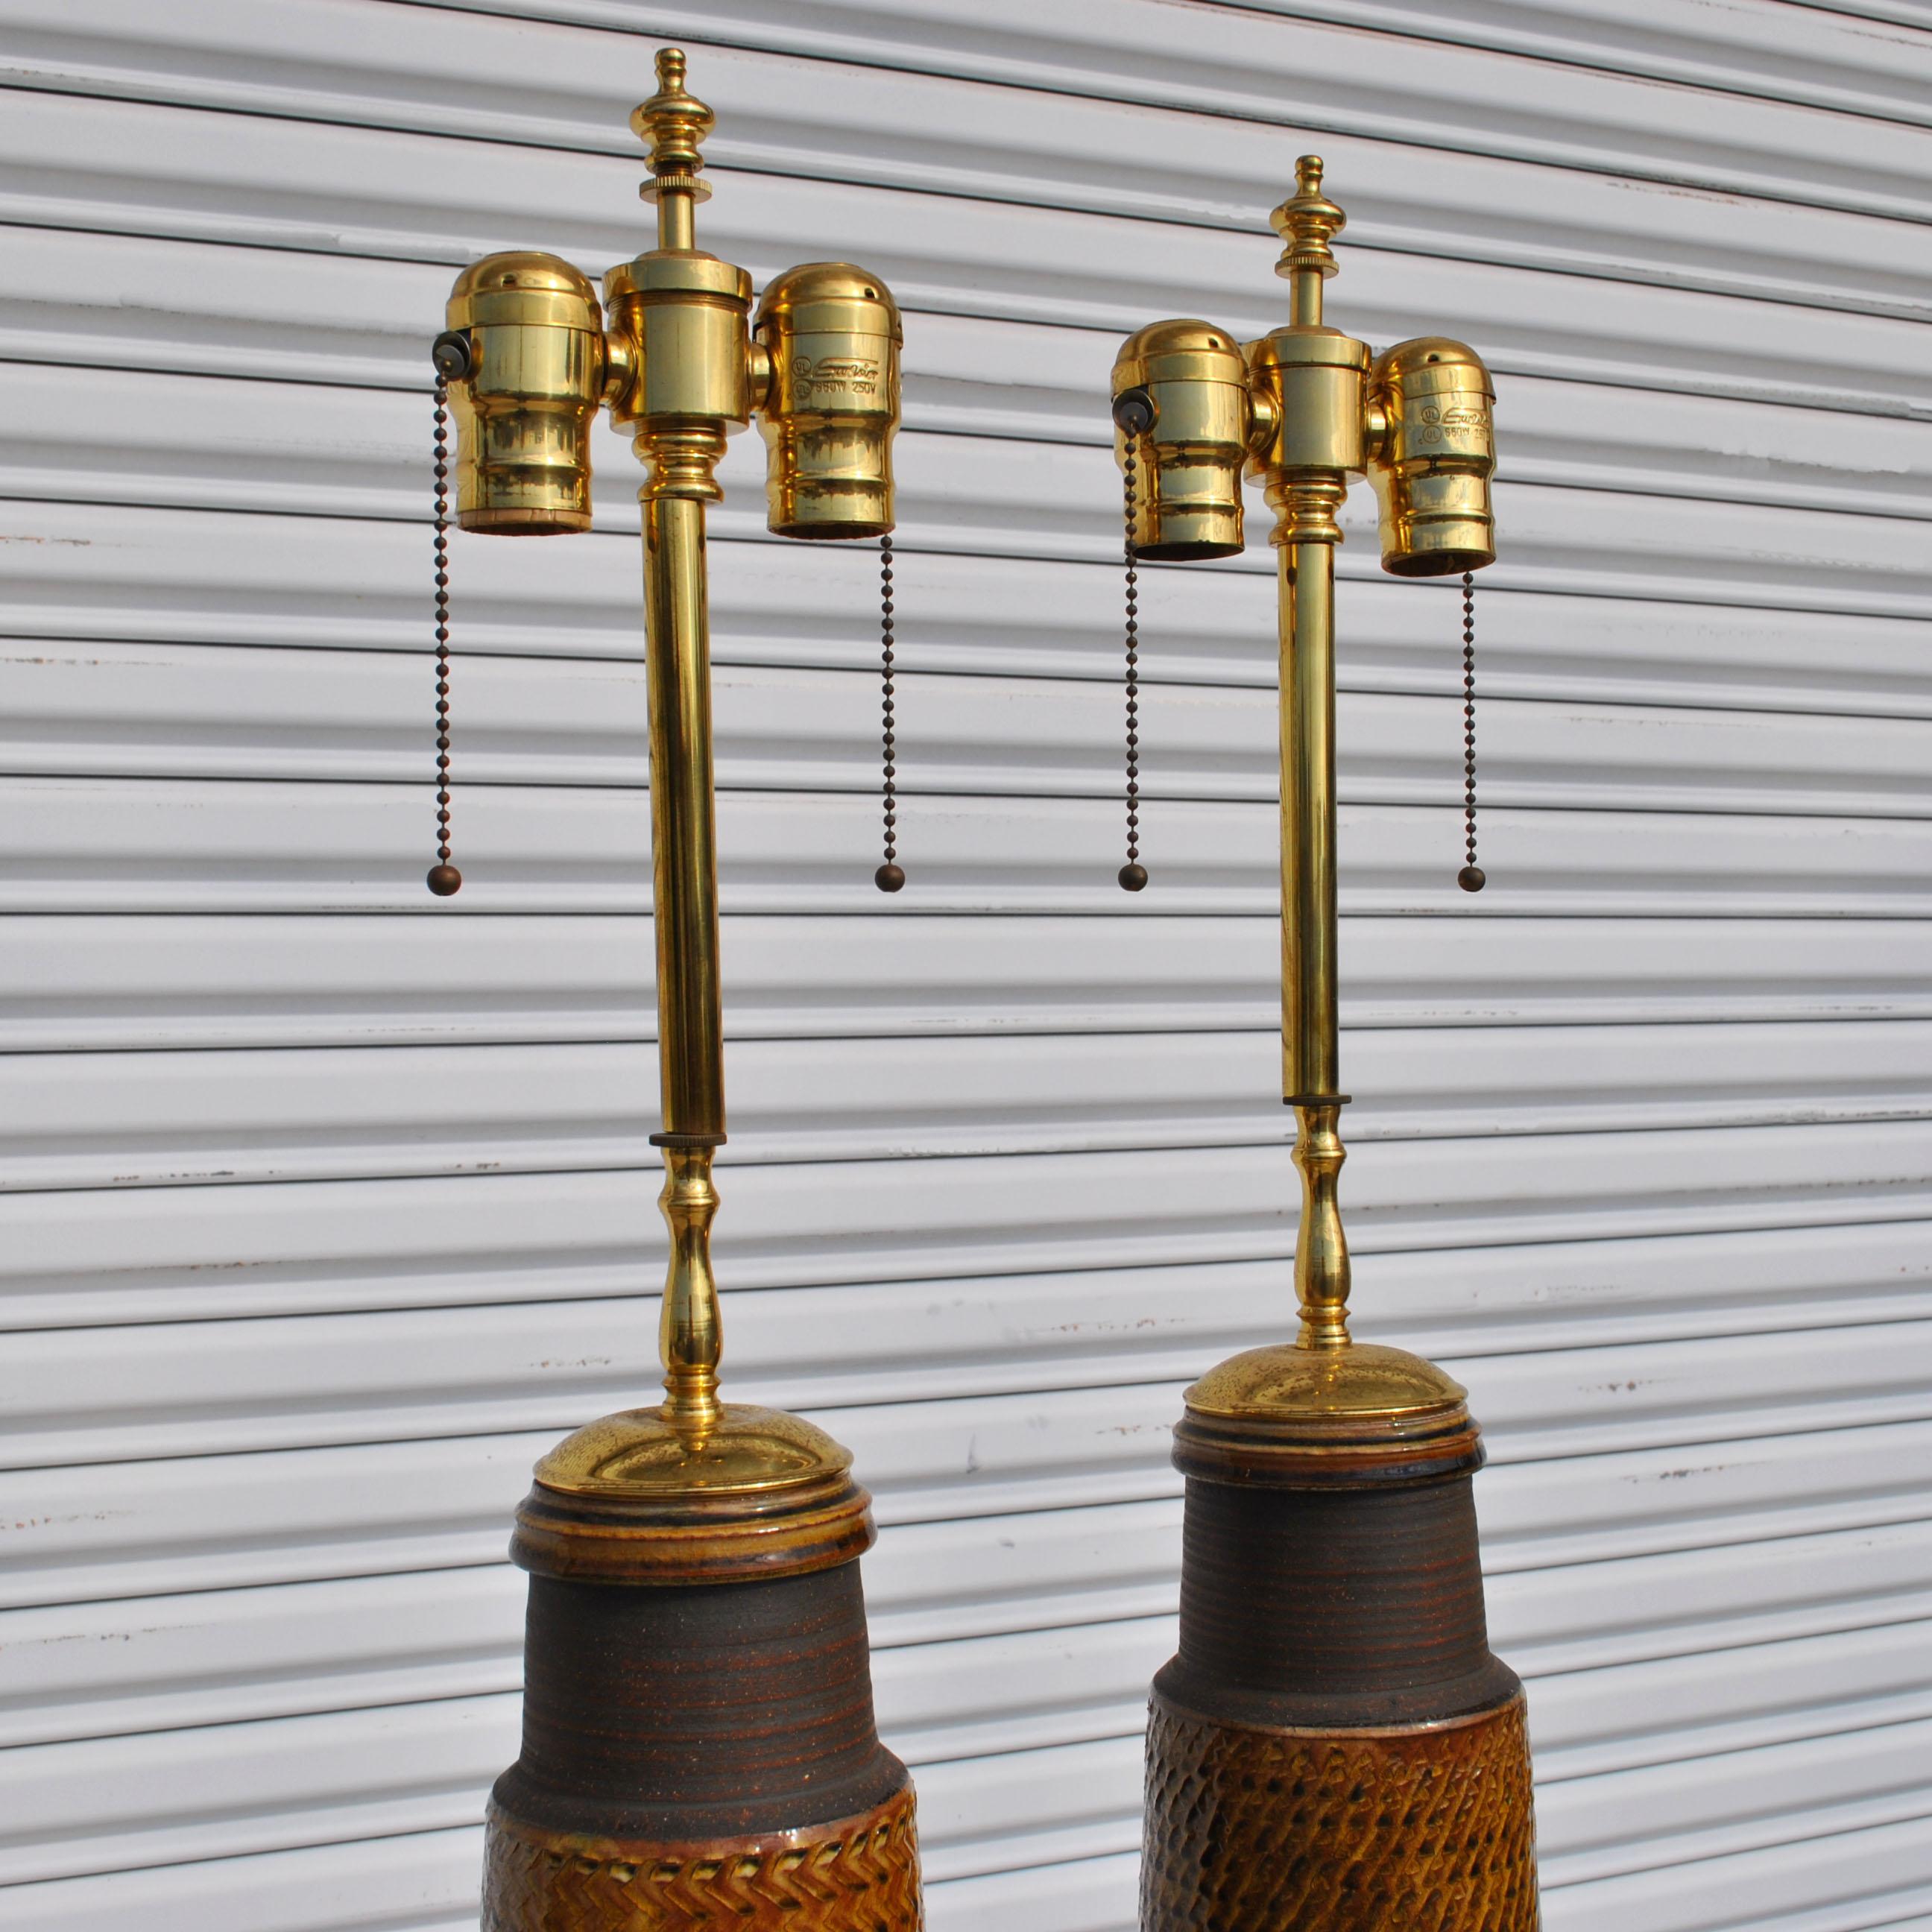 American Pair of Ceramic Table Lamps in a Woven Motif